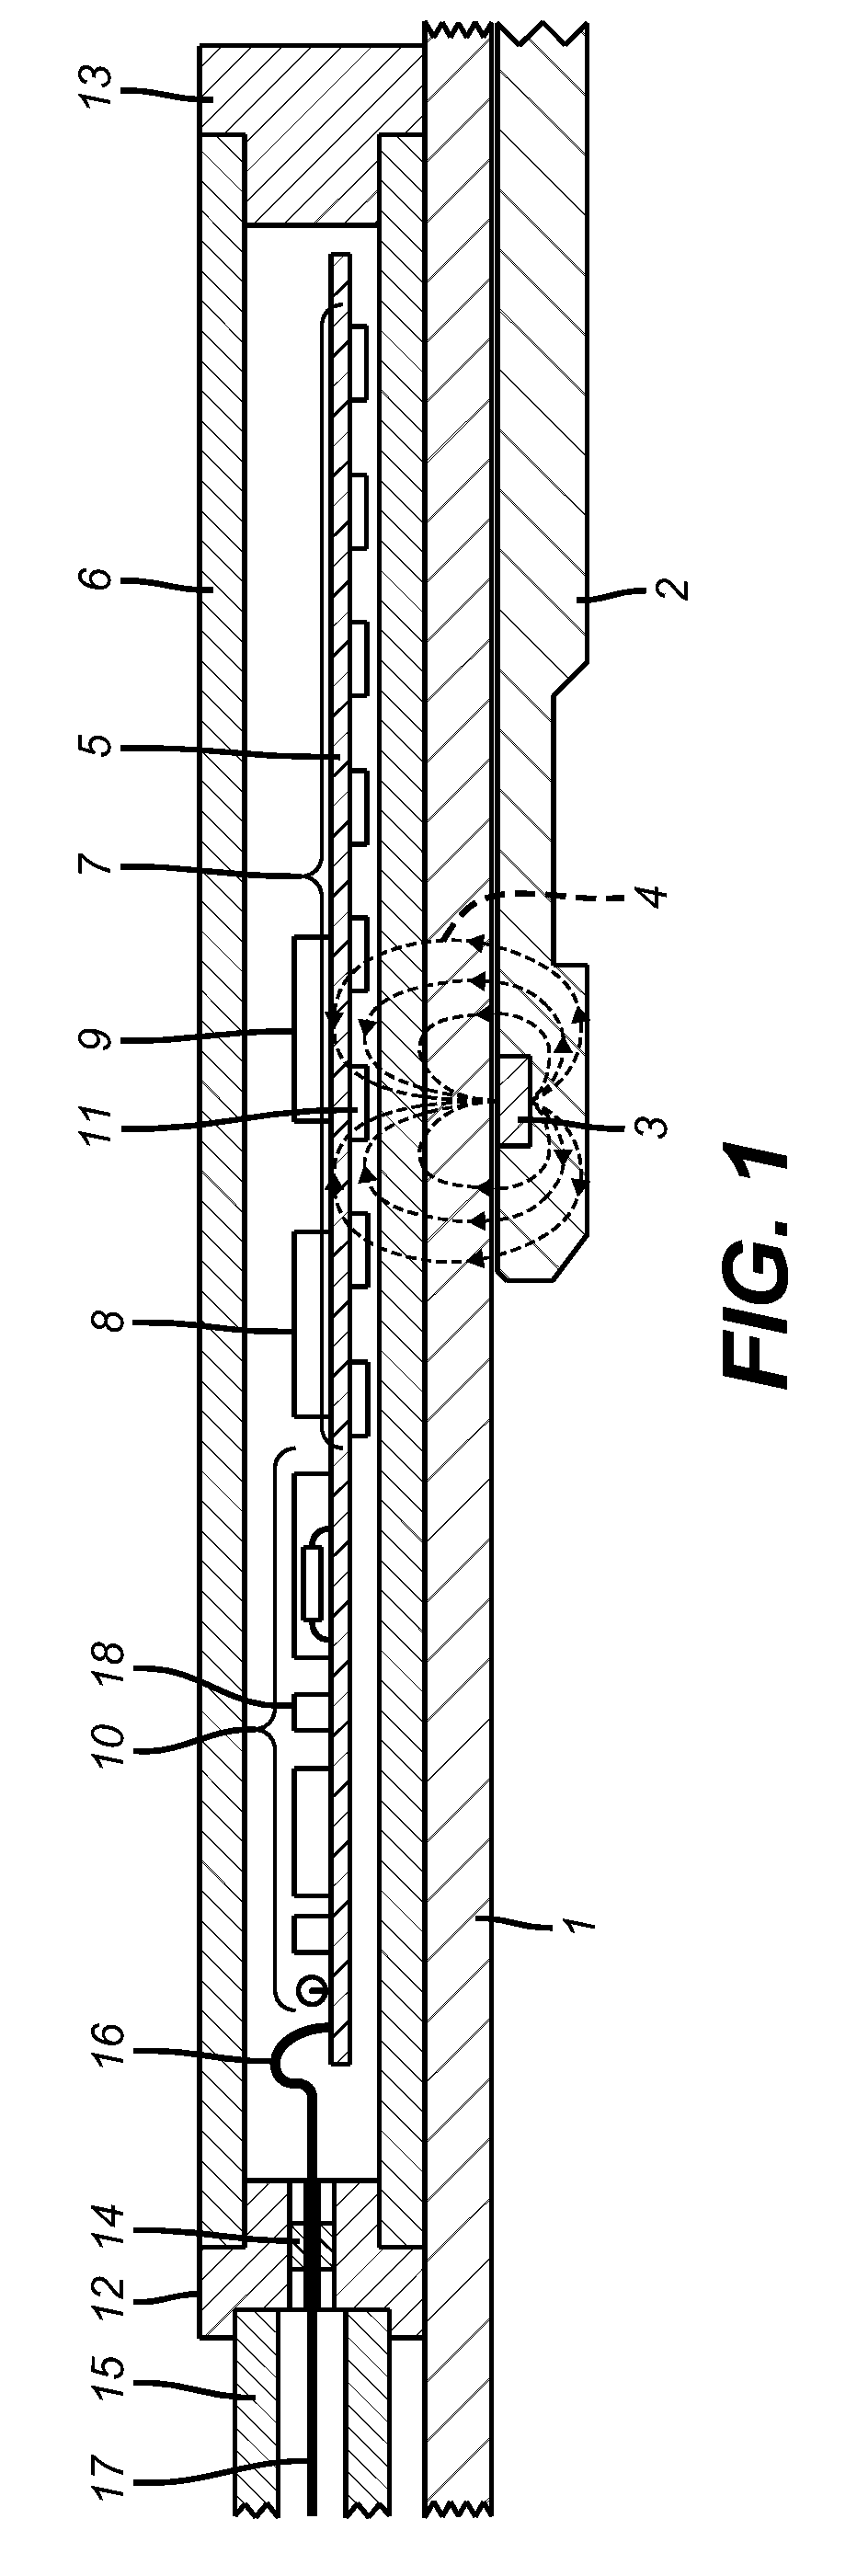 Position Sensor for a Downhole Completion Device